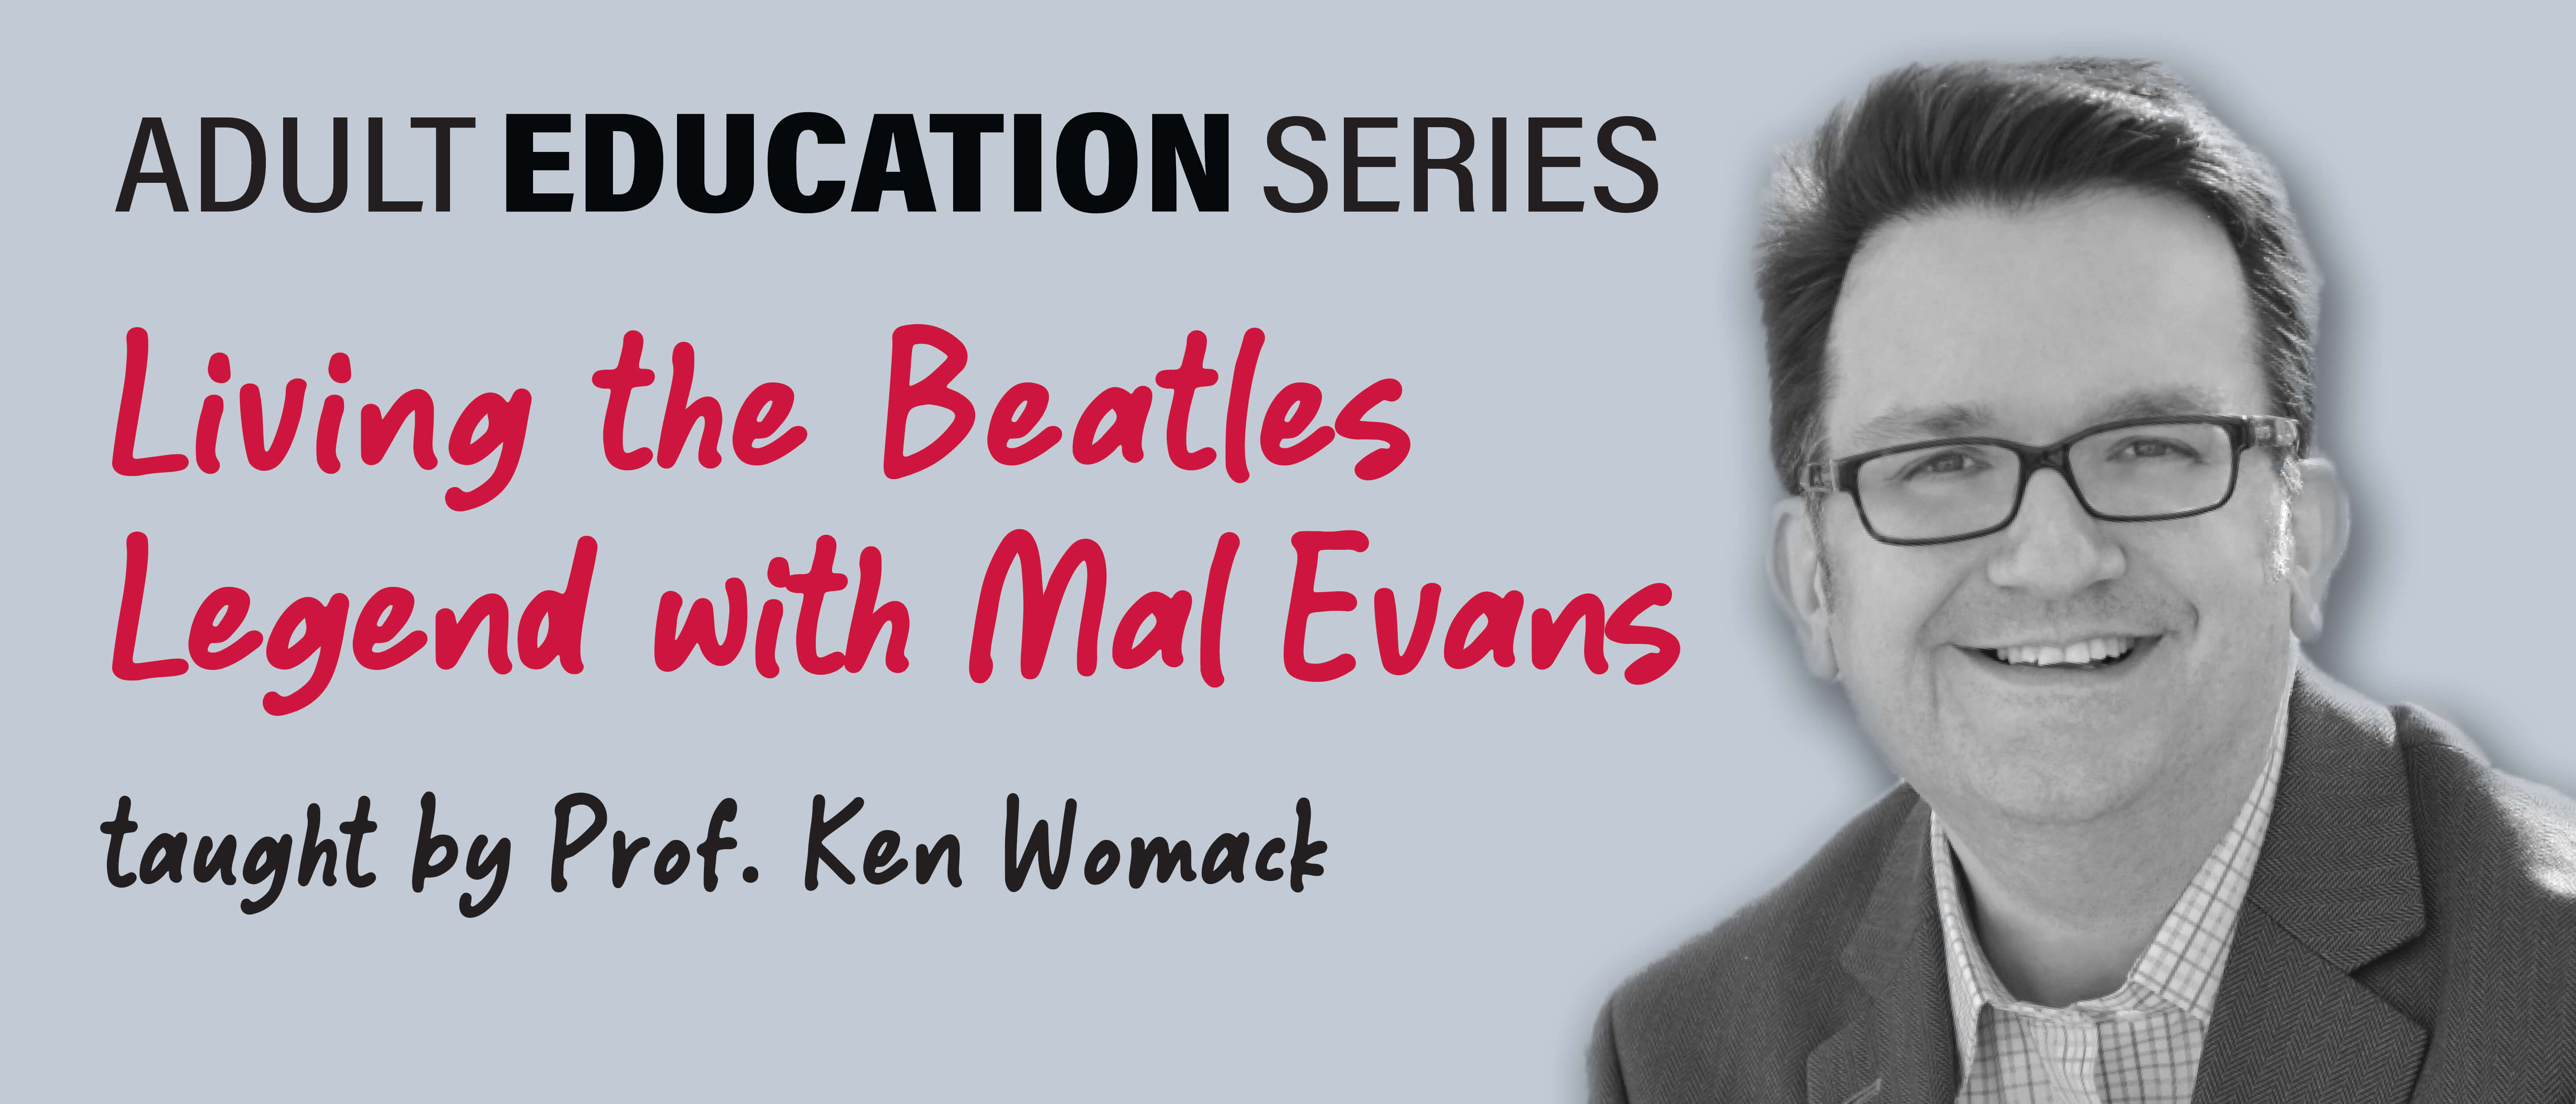 Adult Education Series: Living the Beatles Legend with Mal Evans taught by Ken Womack